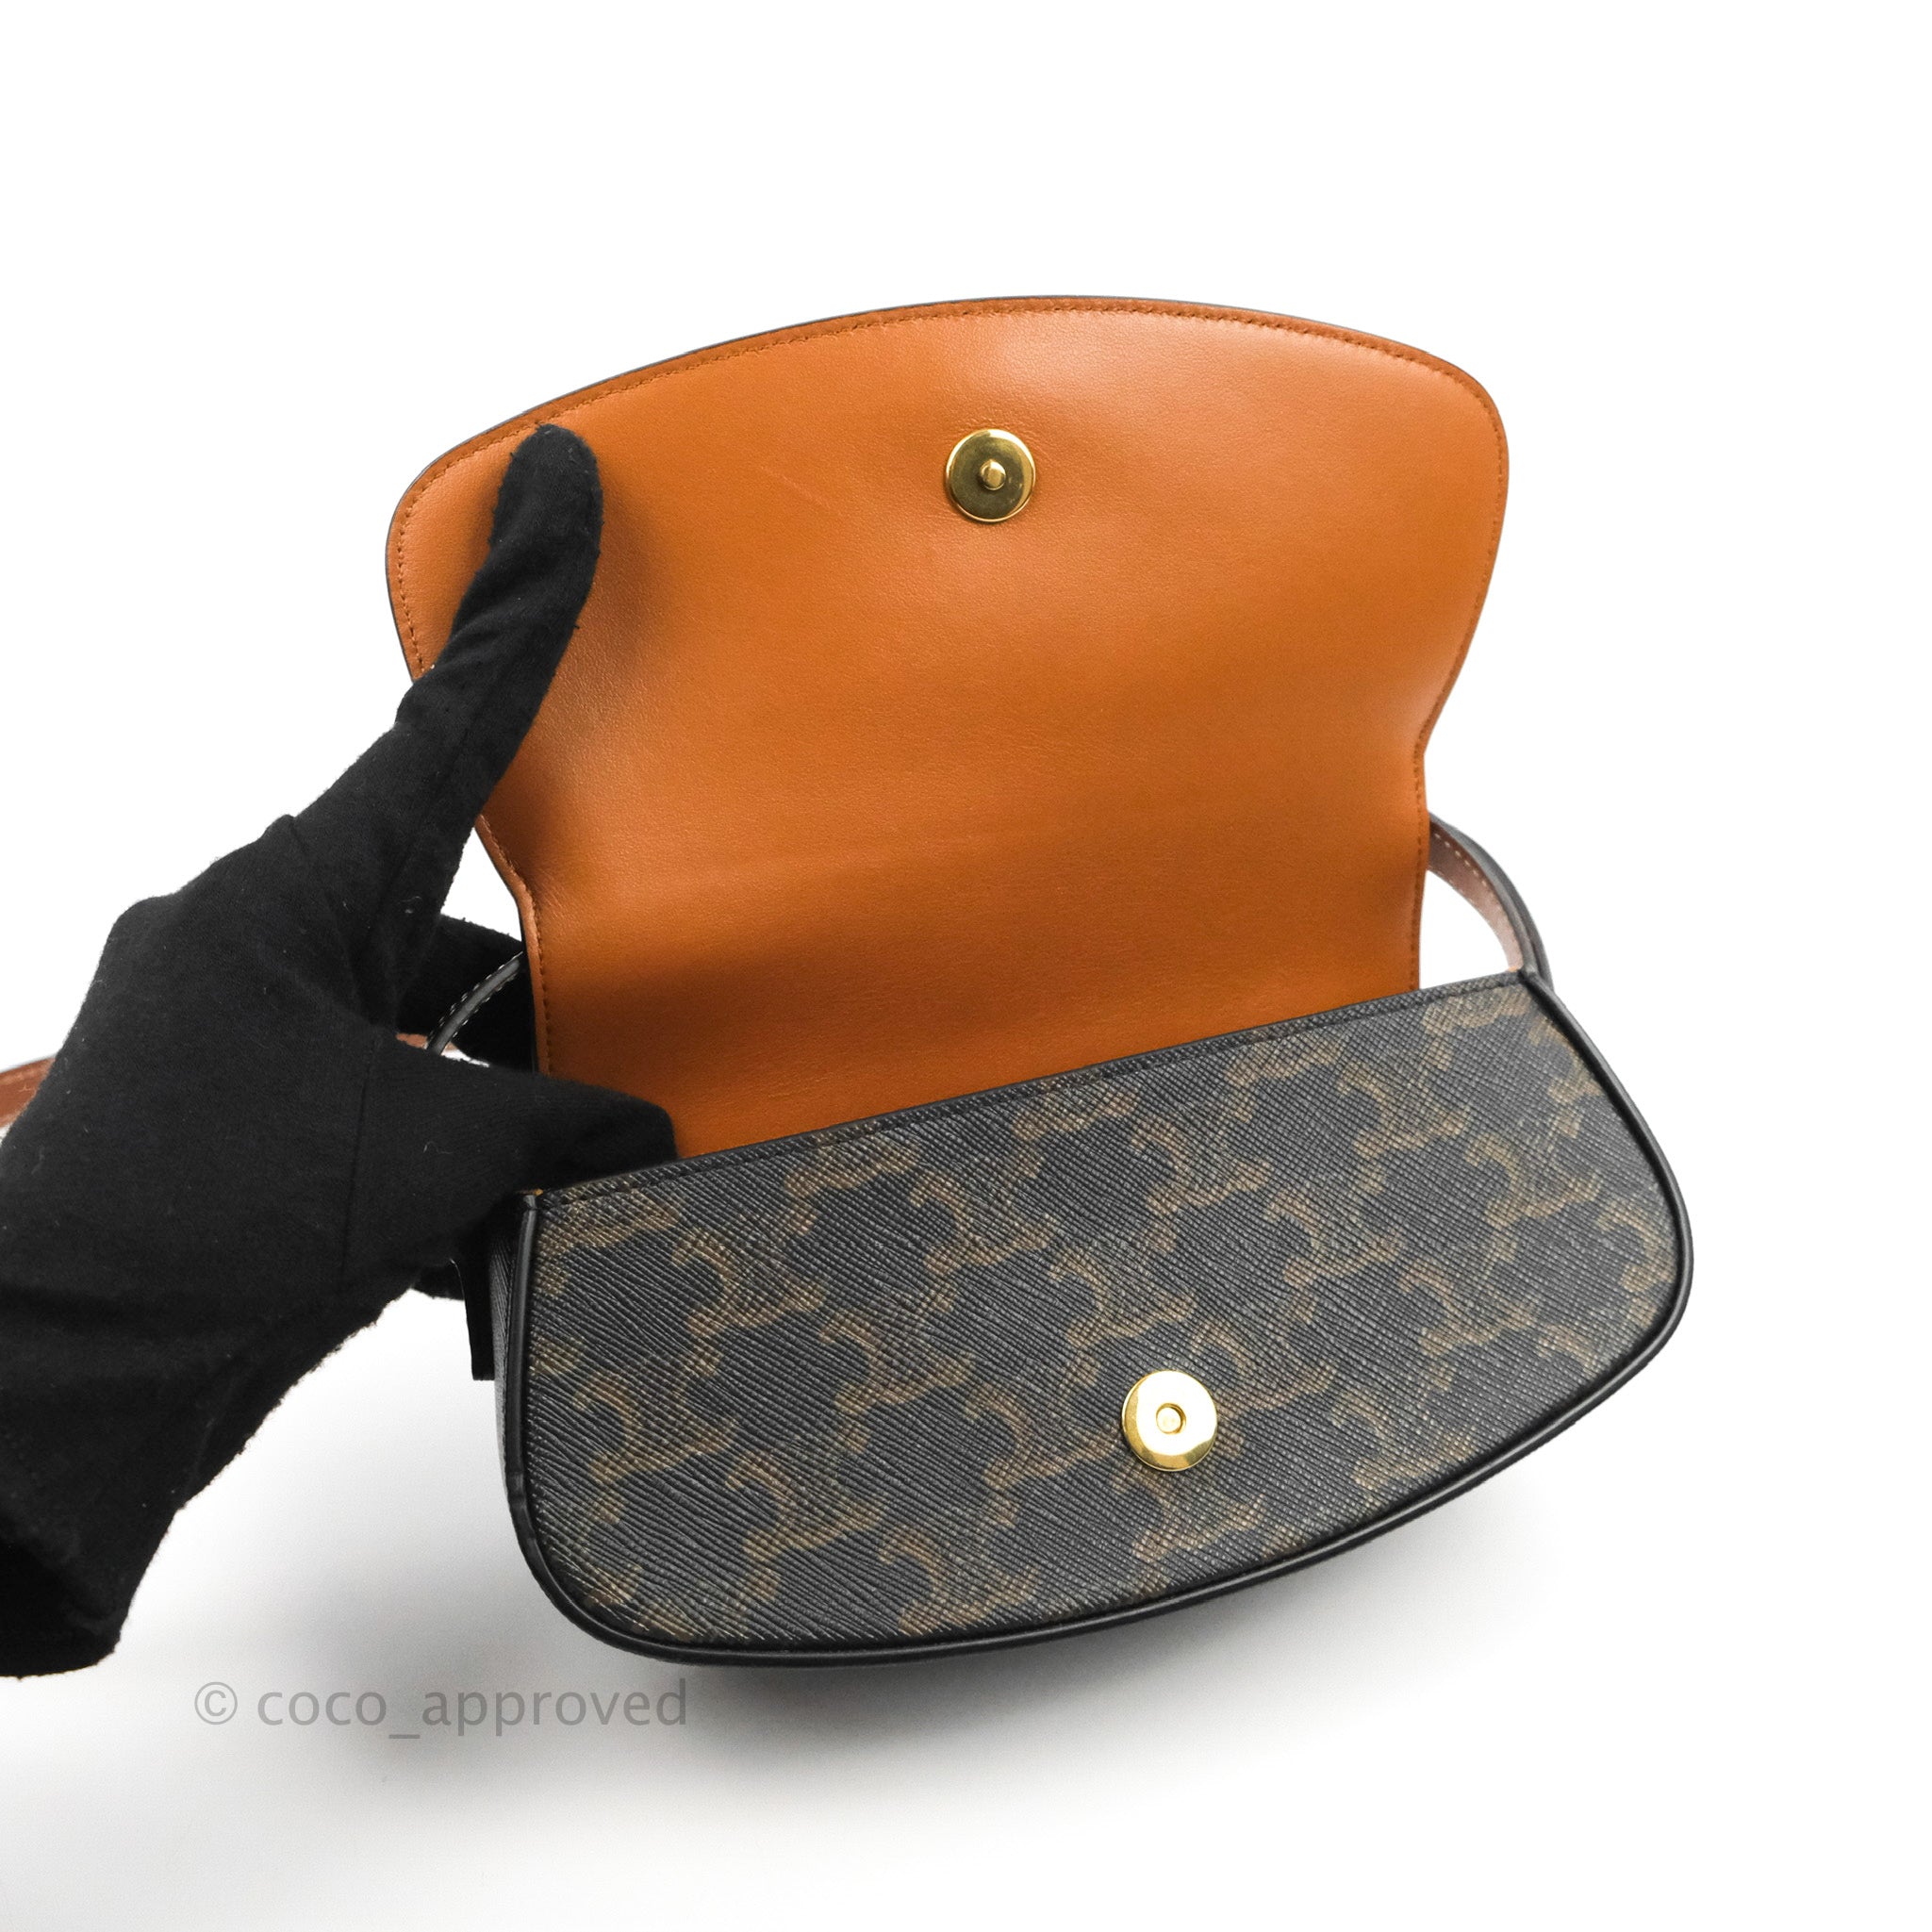 CELINE CLUTCH ON STRAP IN TRIOMPHE CANVAS AND CALFSKIN